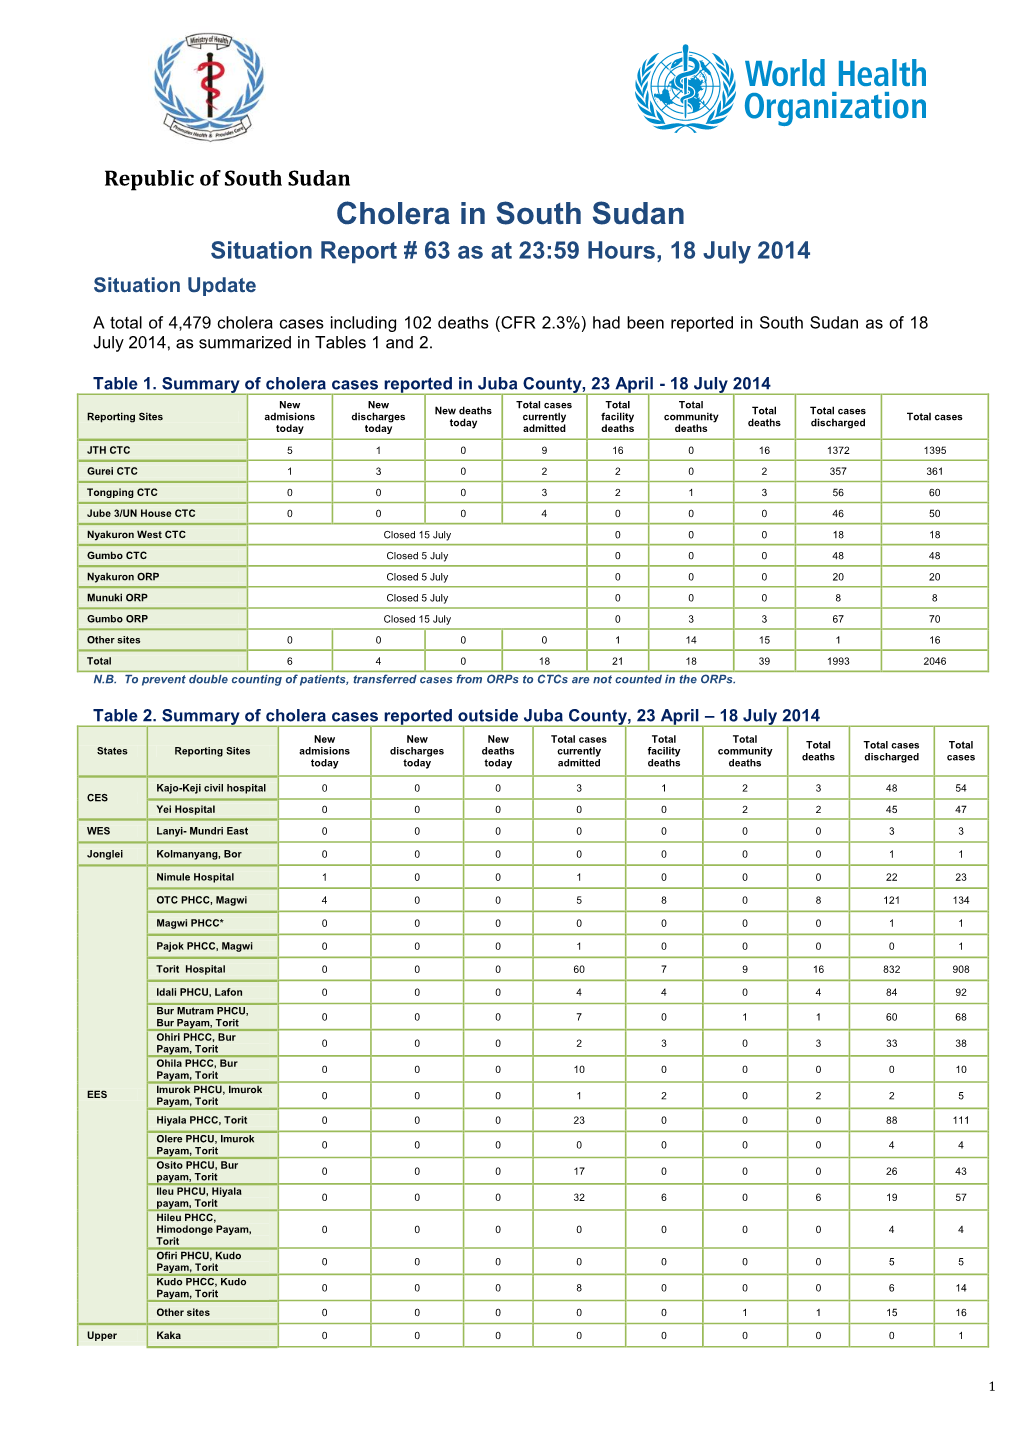 Cholera in South Sudan Situation Report # 63 As at 23:59 Hours, 18 July 2014 Situation Update